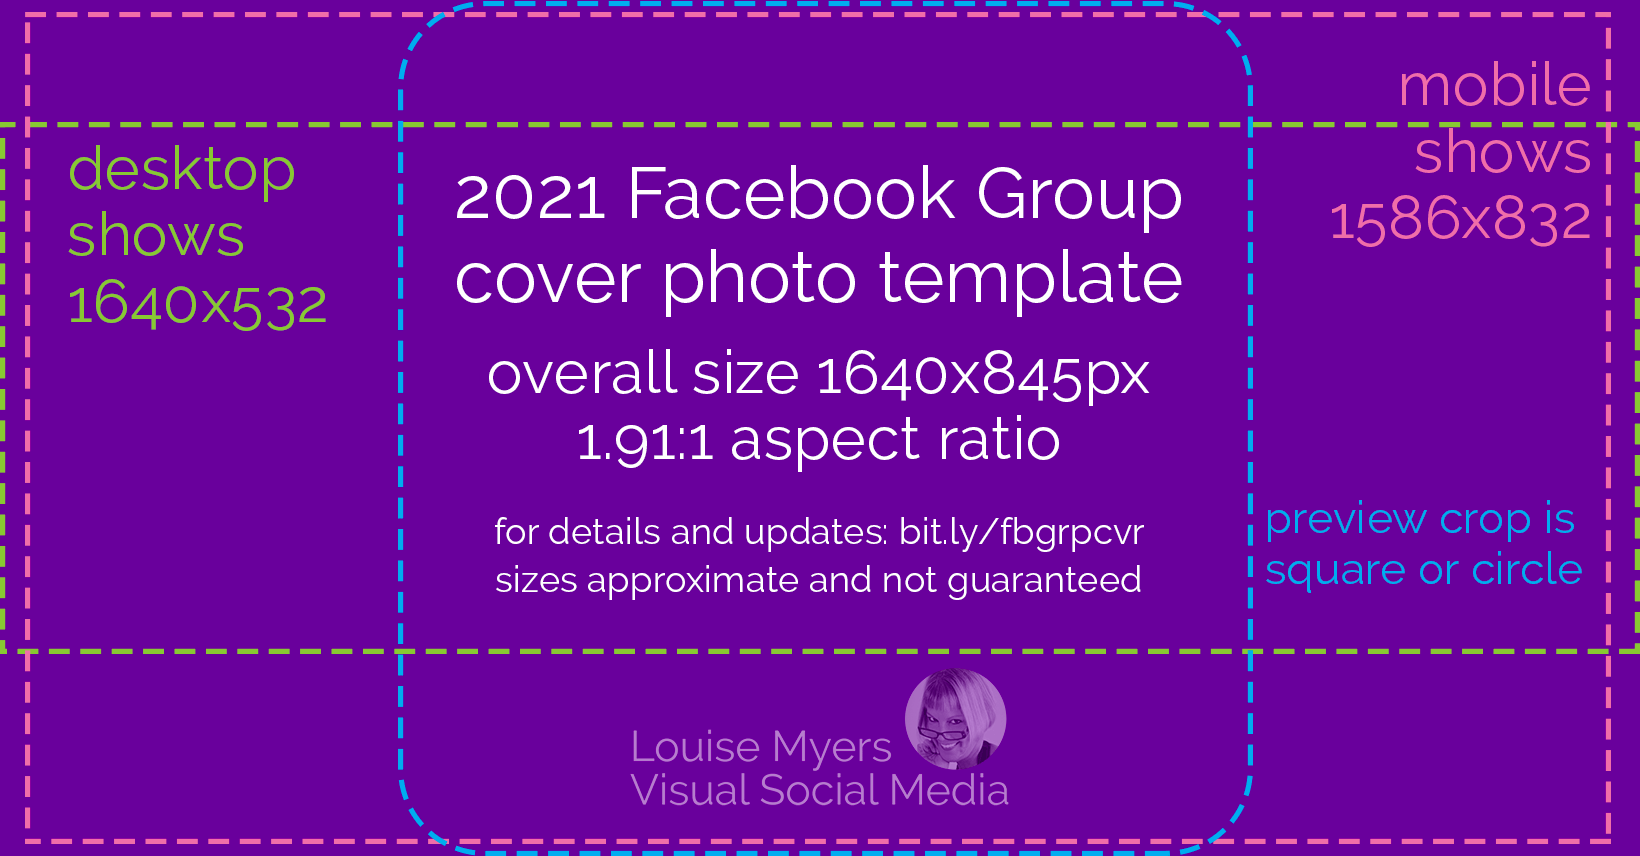 Facebook Group Cover Photo template for 2021